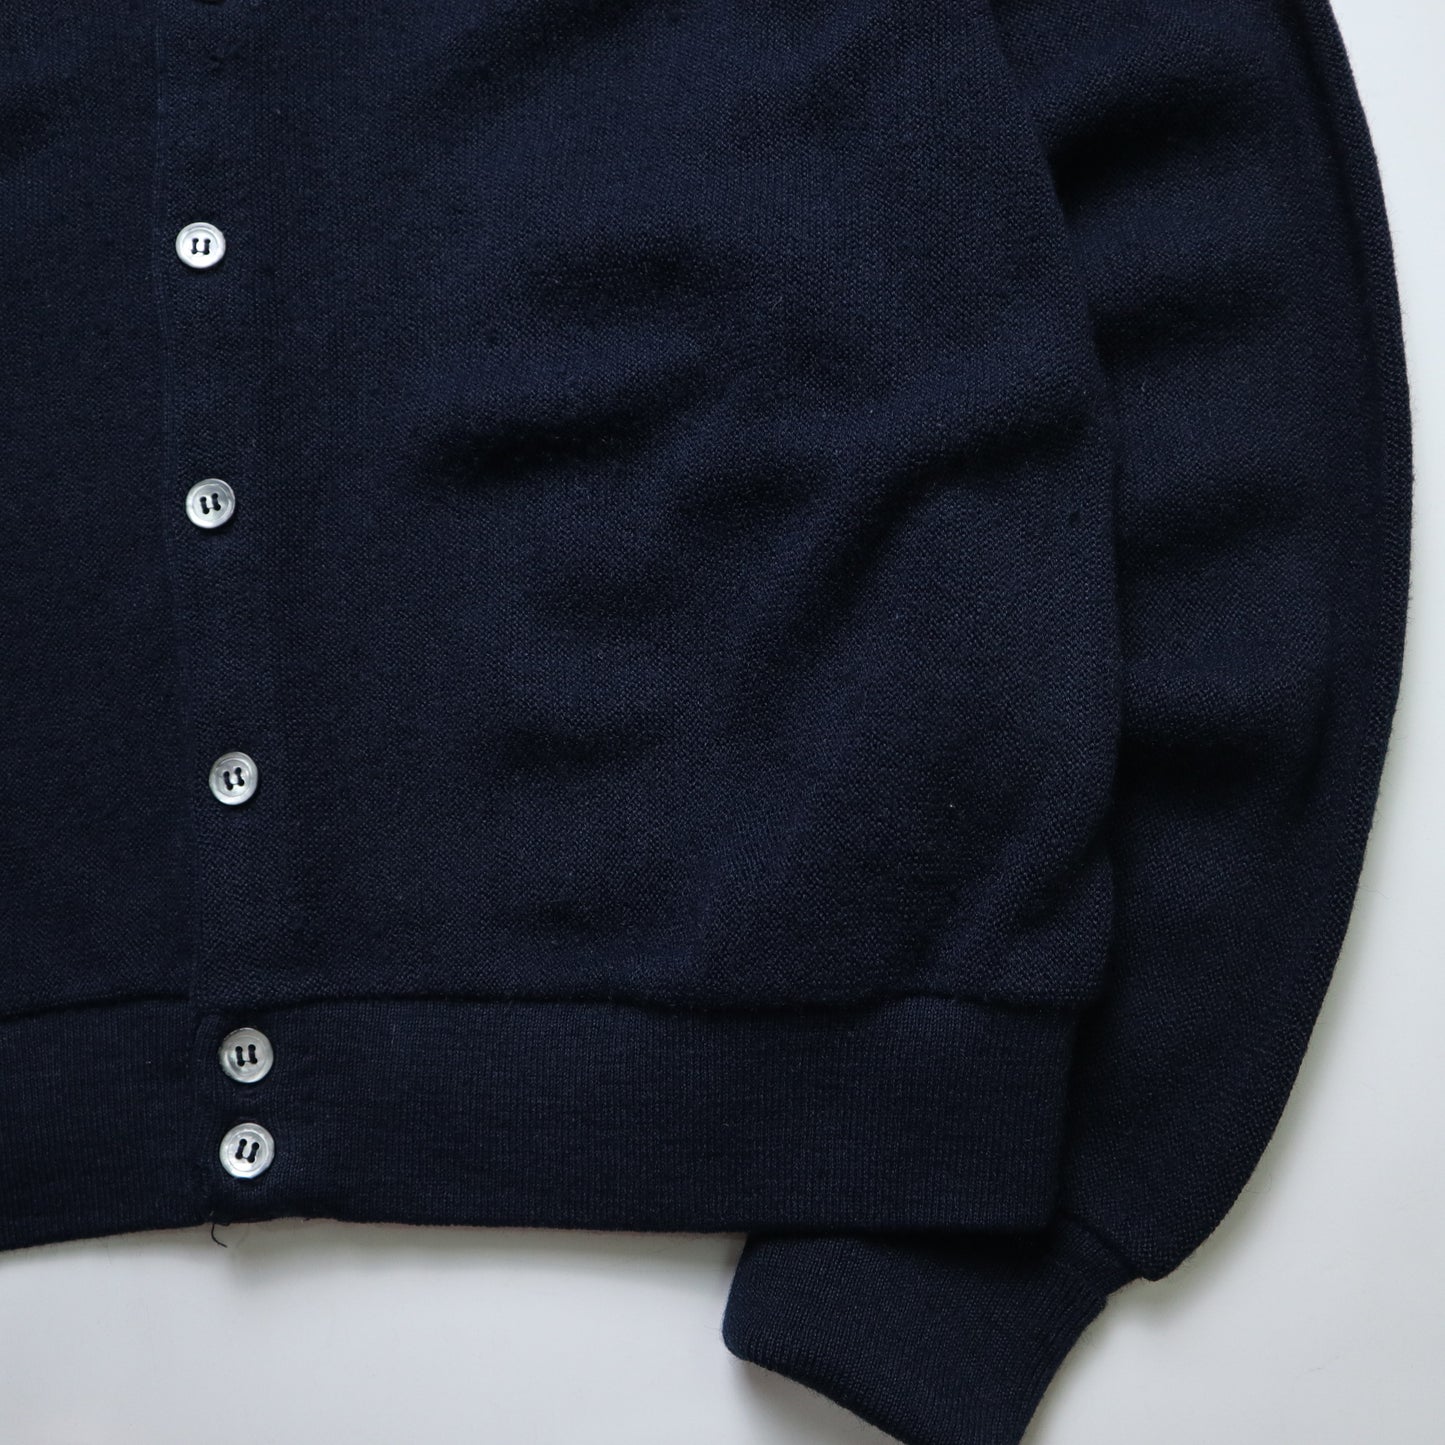 1980s Lacoste IZOD American-made blue and black cardigan sweater